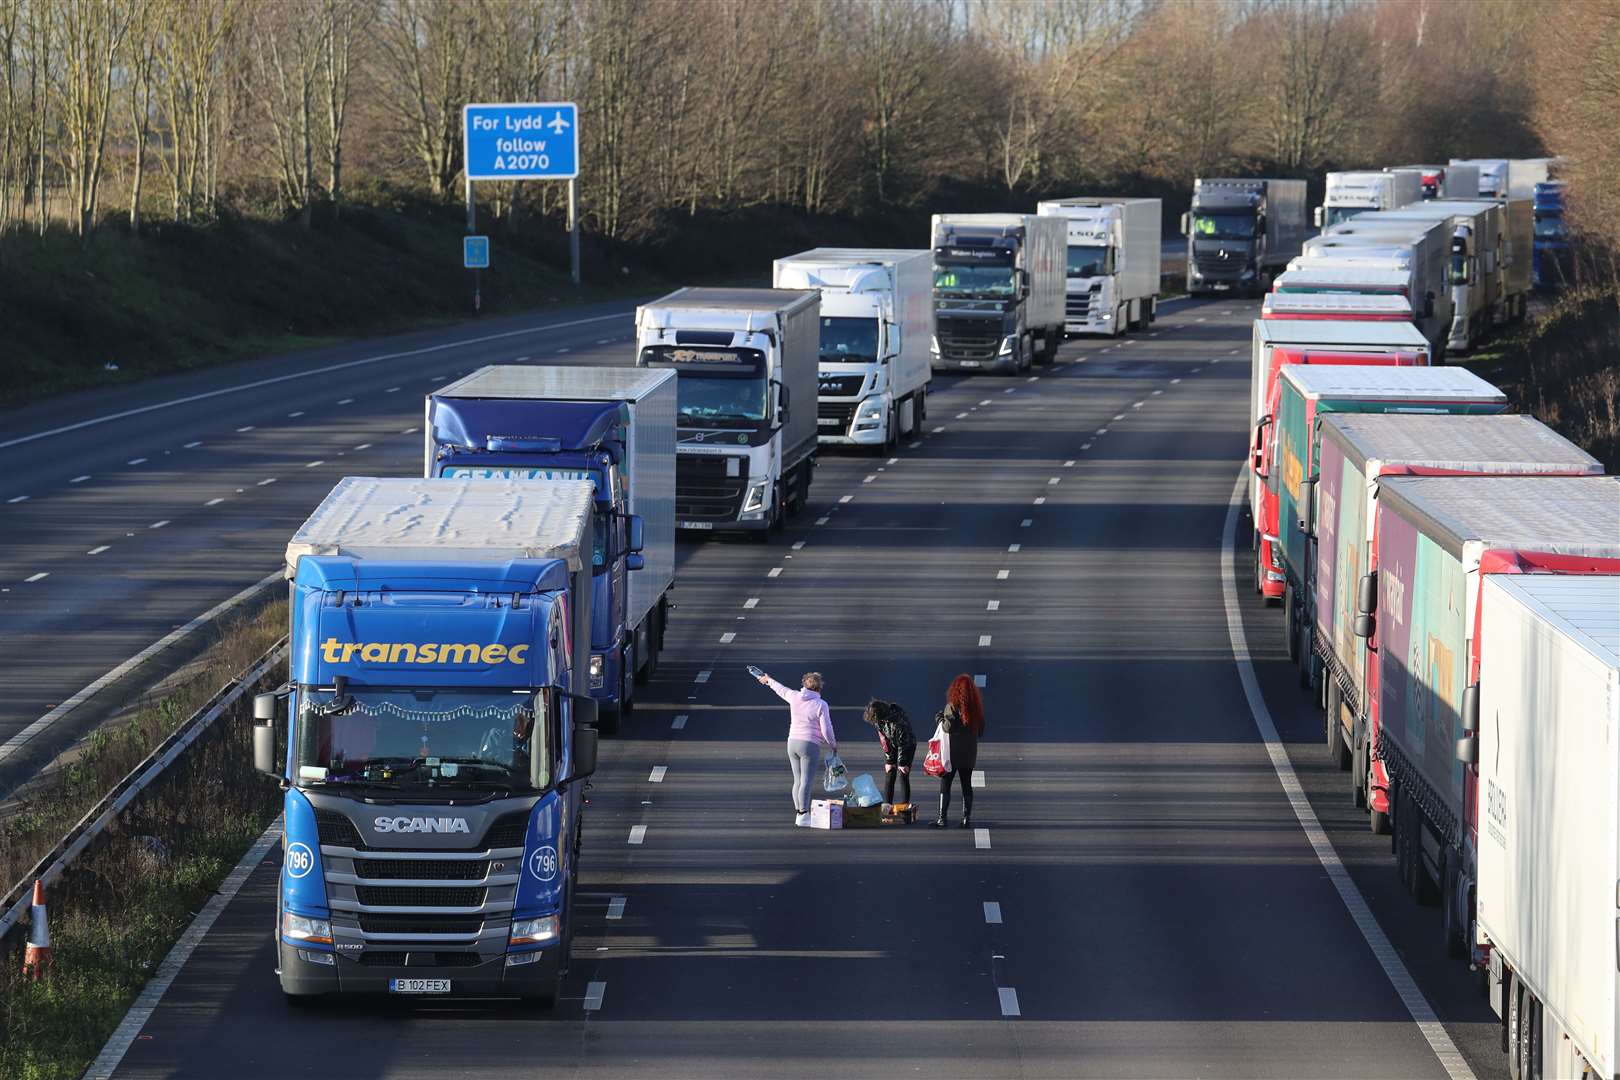 Three women hand out food and water to drivers in their vehicles on the M20 near Ashford, Kent (Gareth Fuller/PA)